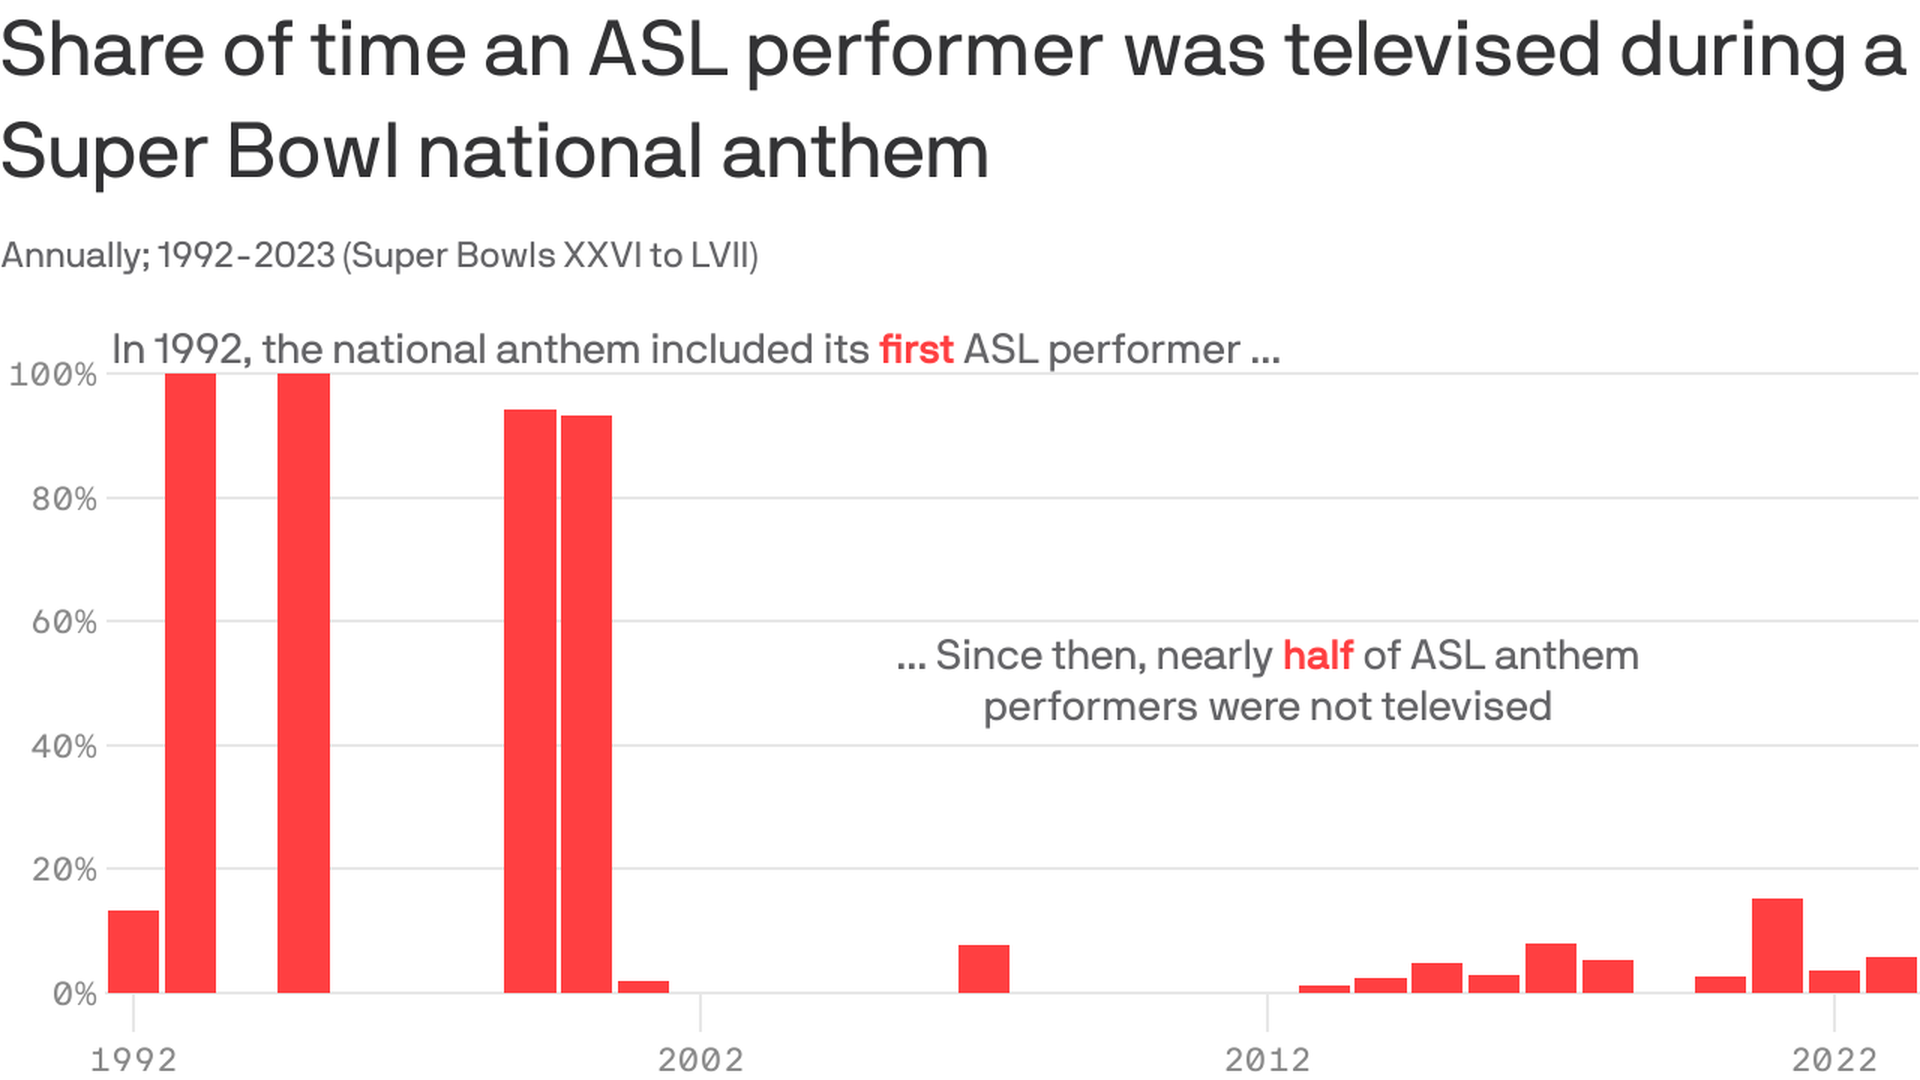 A chart showing the share of time than an ASL performer was televised during a Super Bowl national anthem.